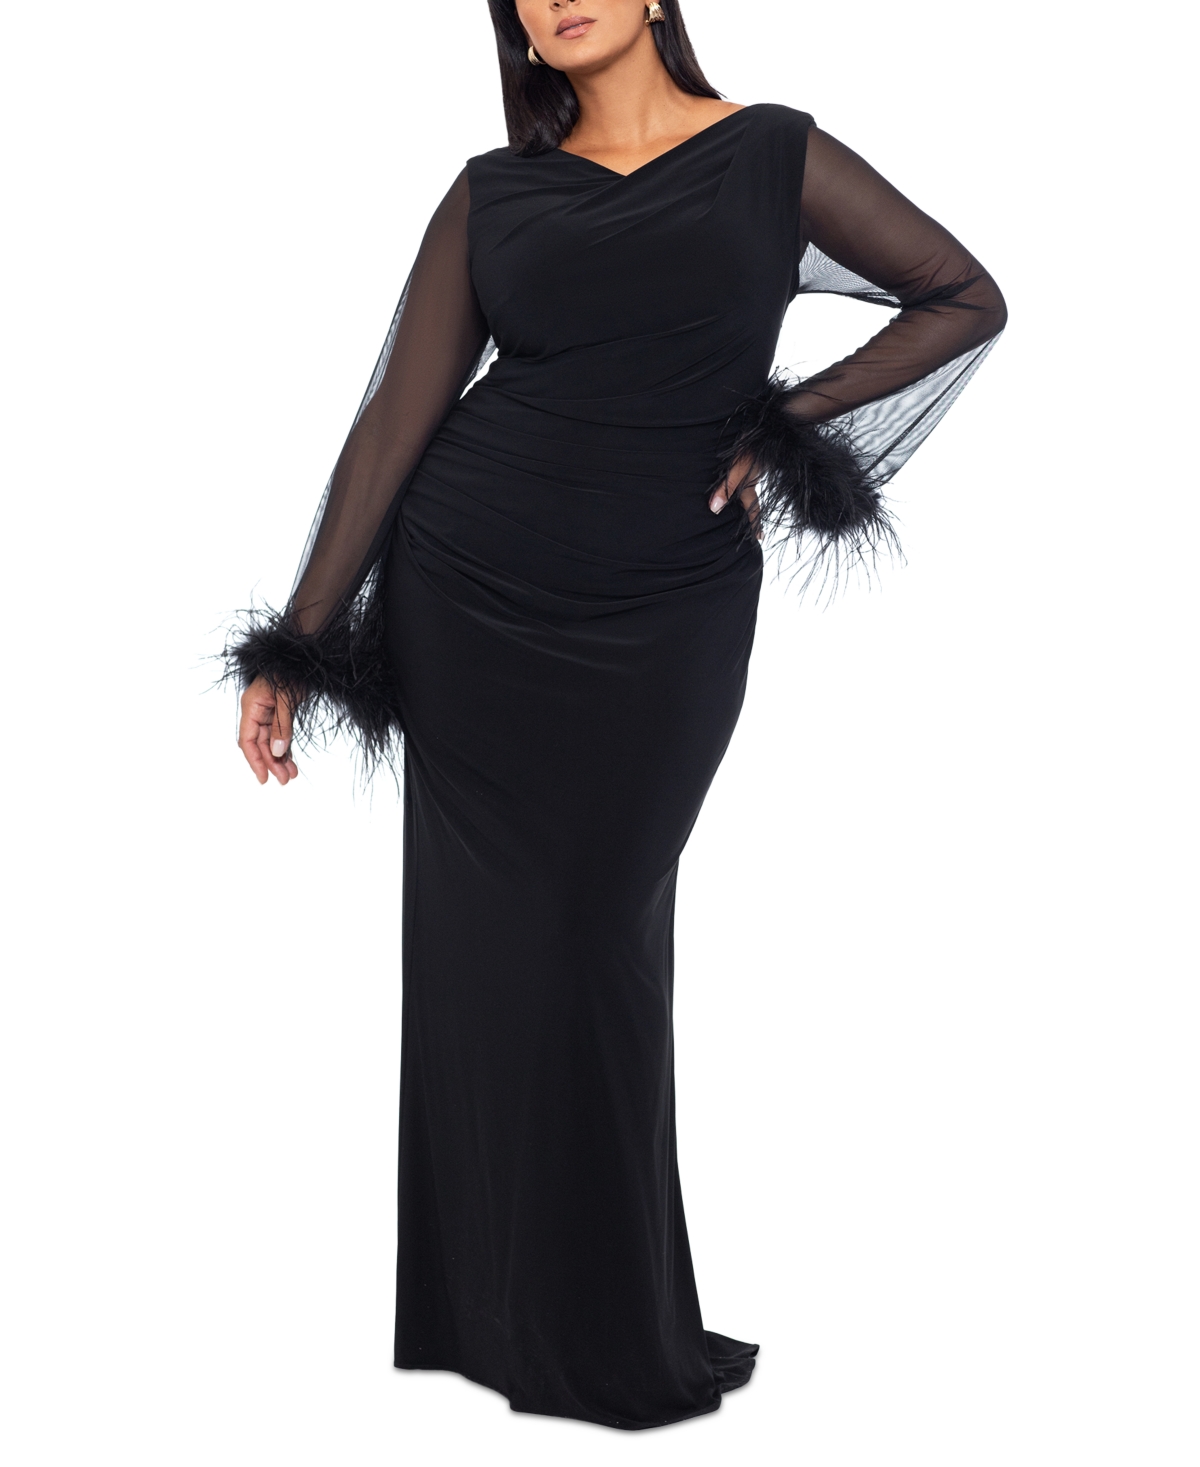 70s Prom, Formal, Evening, Party Dresses Betsy  Adam Plus Size Feather-Cuff Sheath Gown - Black $299.00 AT vintagedancer.com